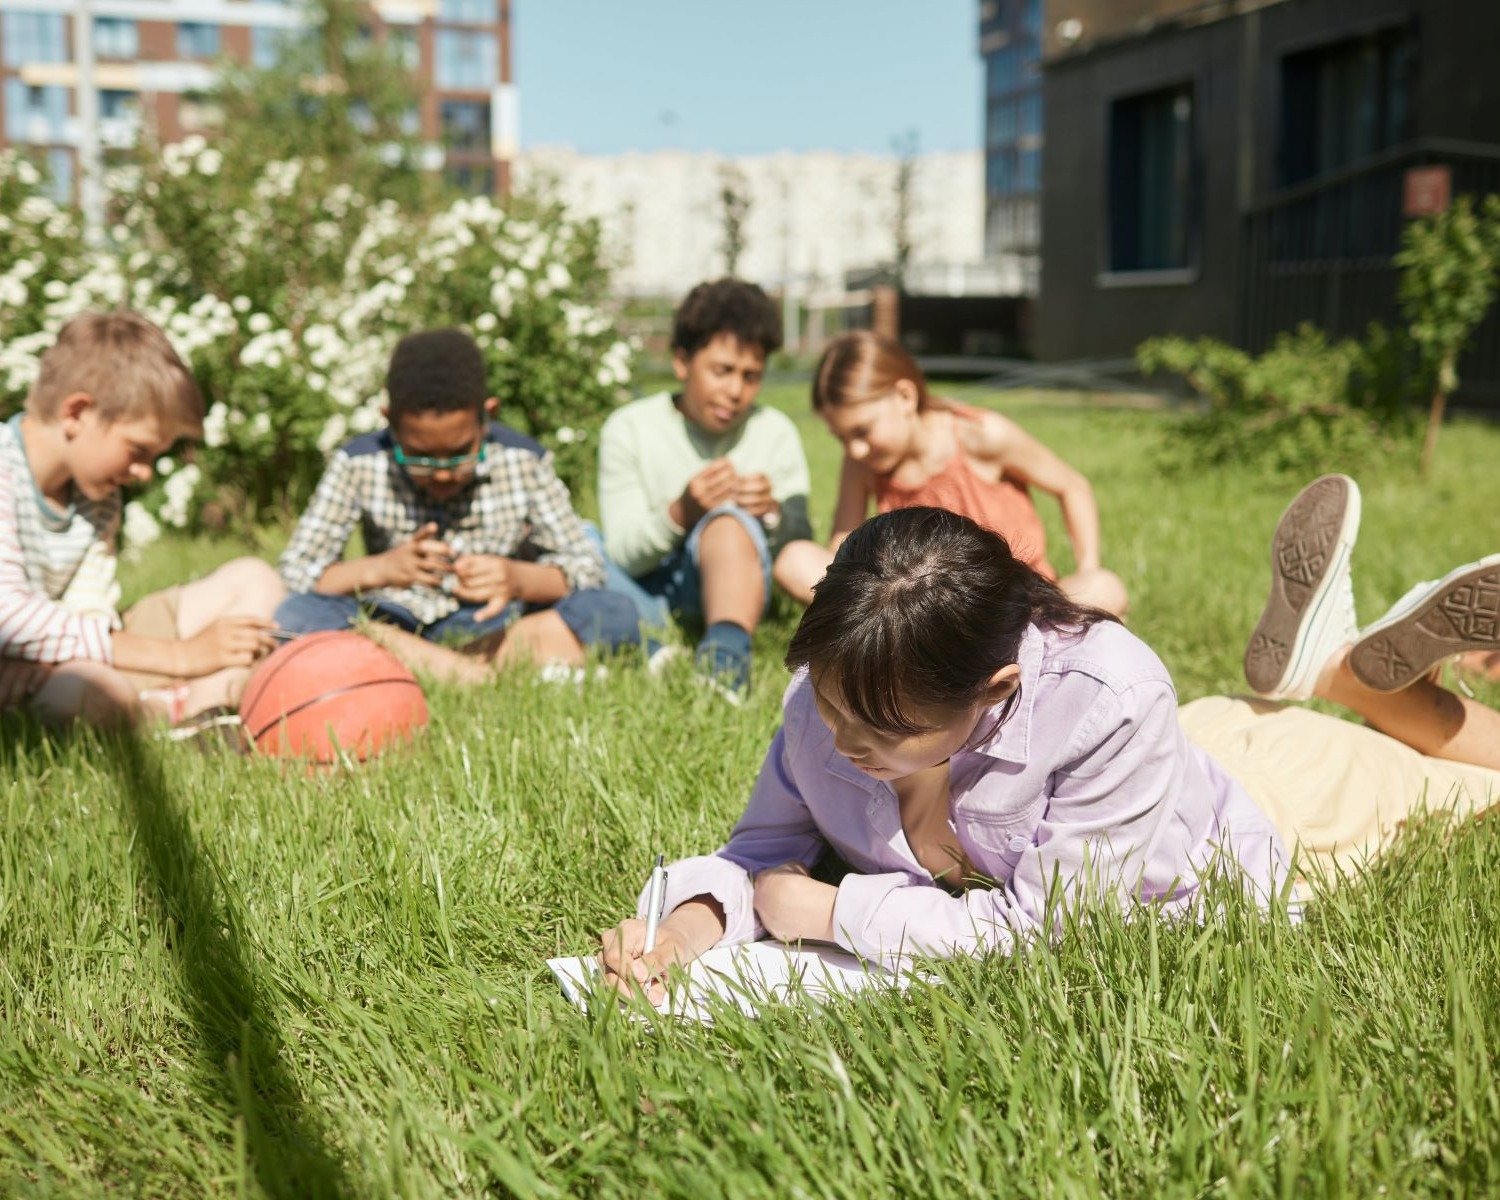 How to Prevent Summer Learning Loss: What Does the Research Say?